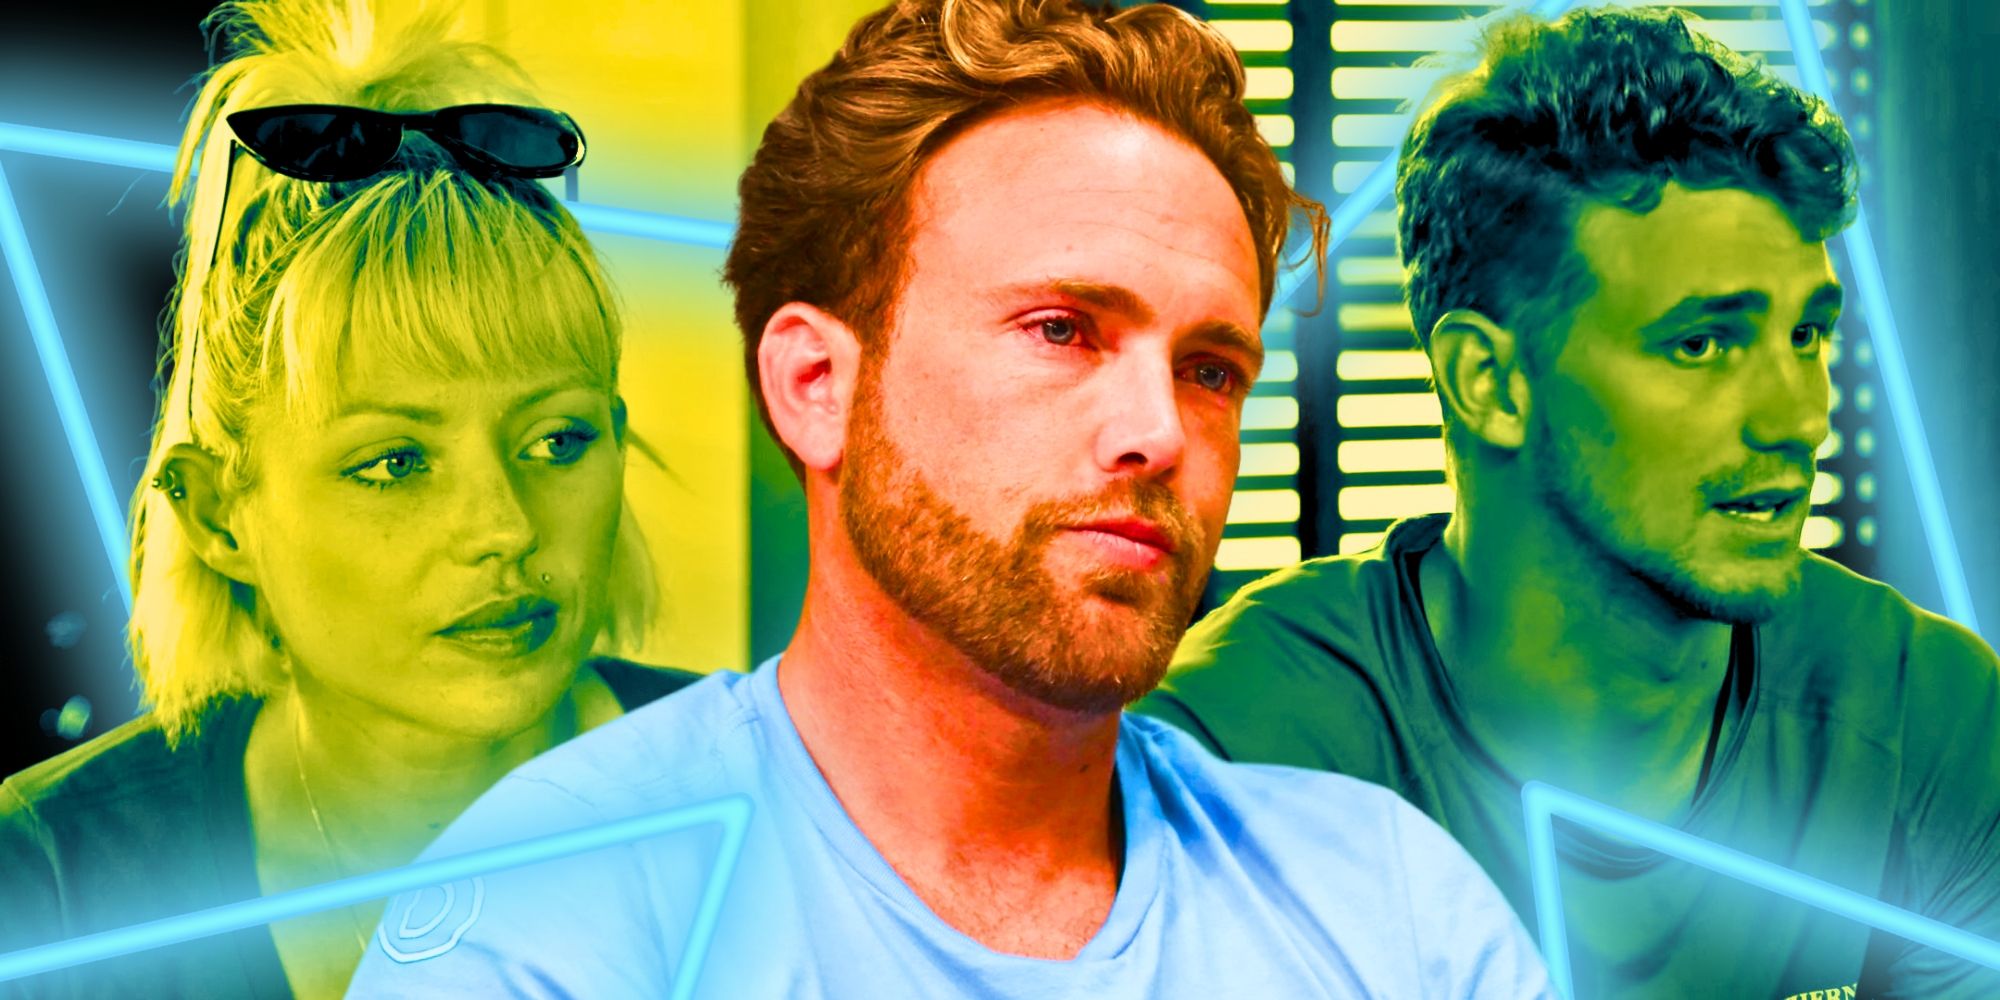 Jared Woodin, Raygan Tyler, Adam Kodra from below deck with neon lights and green filtered background, Jared in foreground